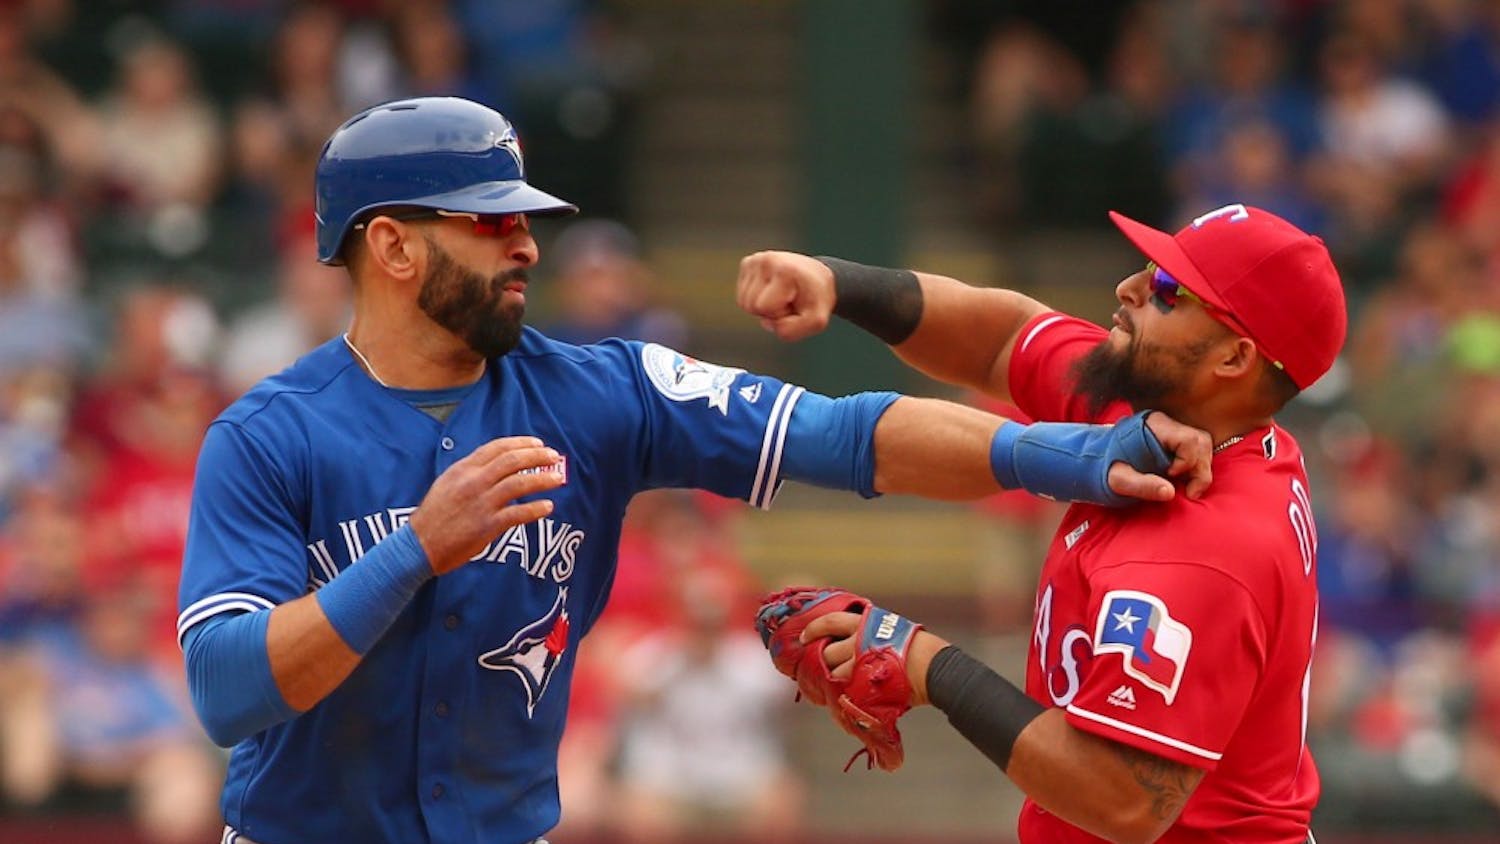 Toronto Blue Jays Jose Bautista (19) gets hit by Texas Rangers second baseman Rougned Odor (12) after Bautista slid into second in the 8th inning at Globe Life Park on May 15, 2016 in Arlington, Texas. The Rangers won 7-6. (Richard W. Rodriguez/Fort Worth Star-Telegram/TNS)  